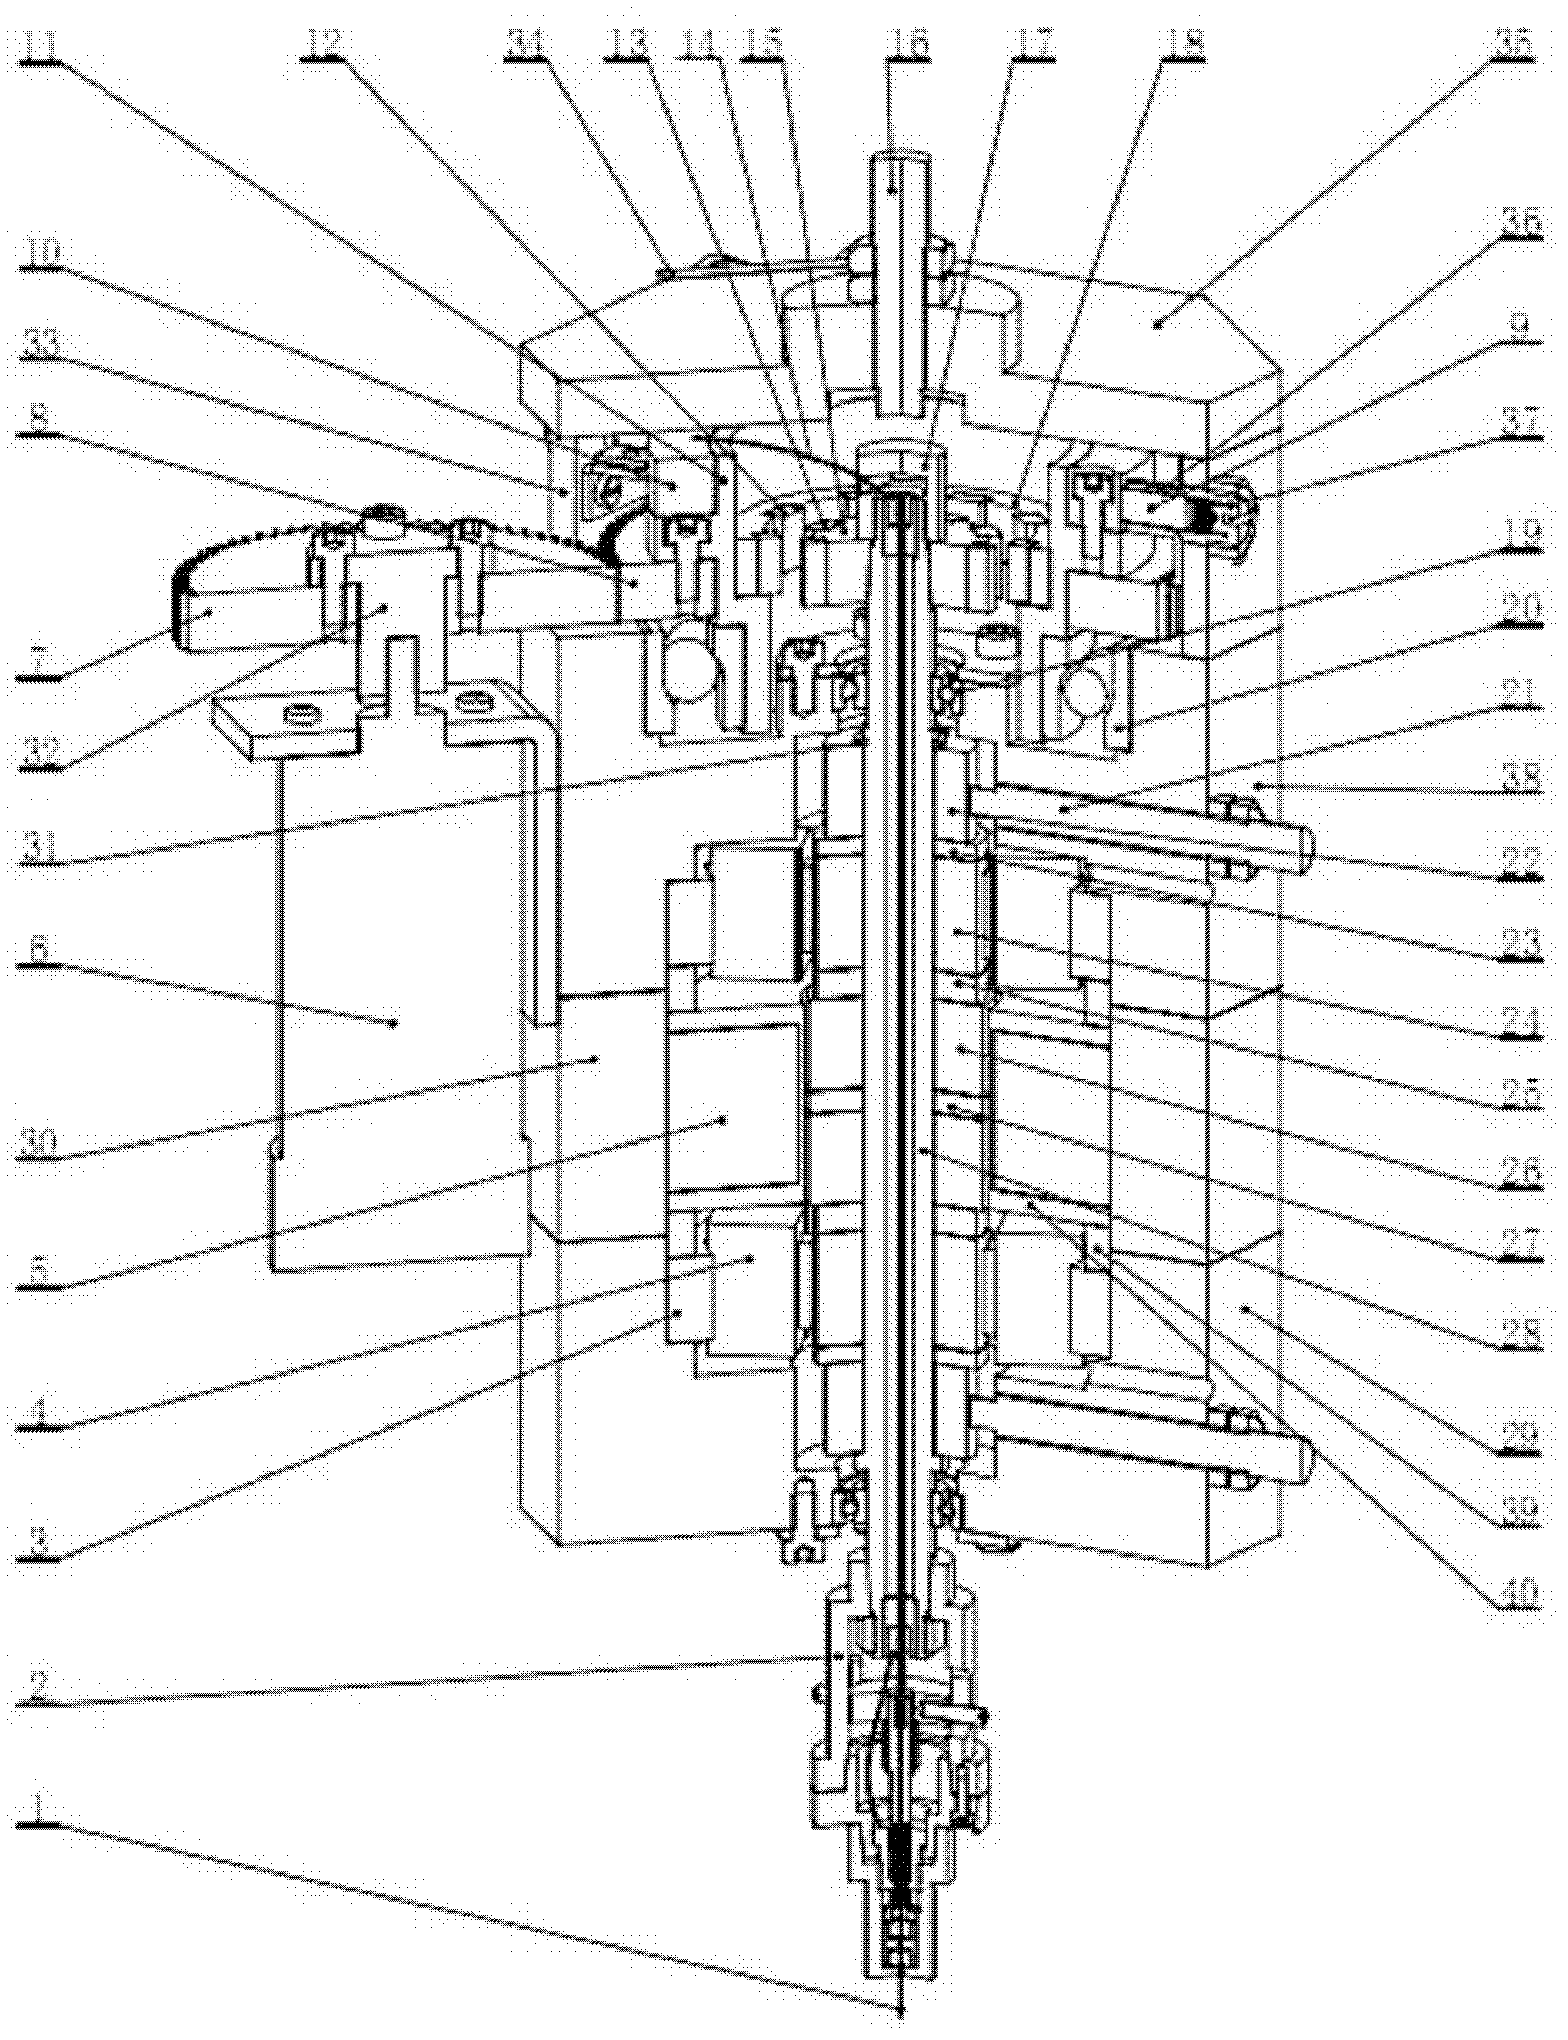 Spindle device for processing micro-hole electric spark based on magnetic levitation servo drive